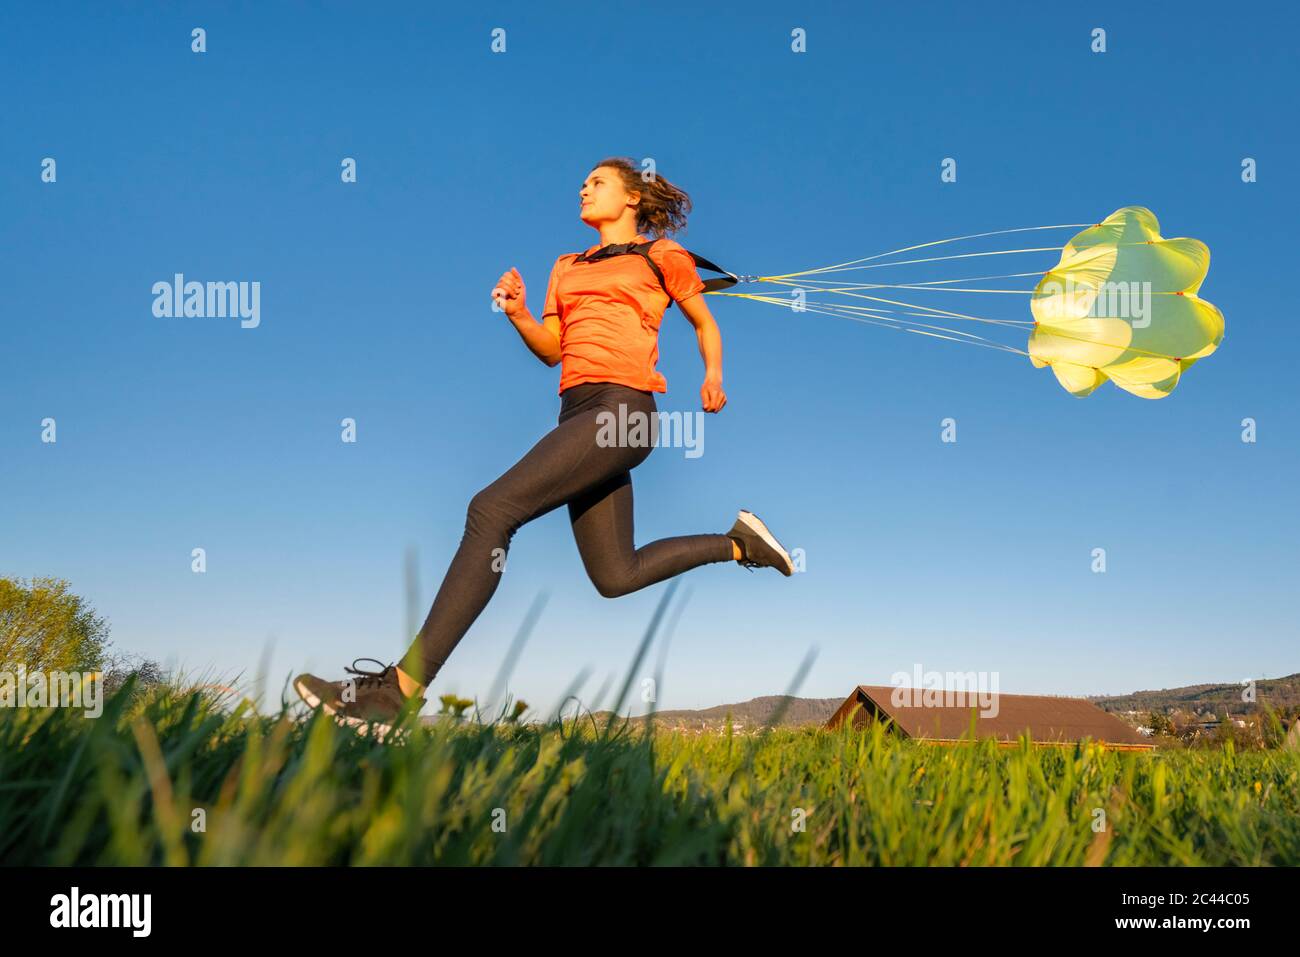 Low angle view of young woman sprinting with parachute against clear blue sky Stock Photo